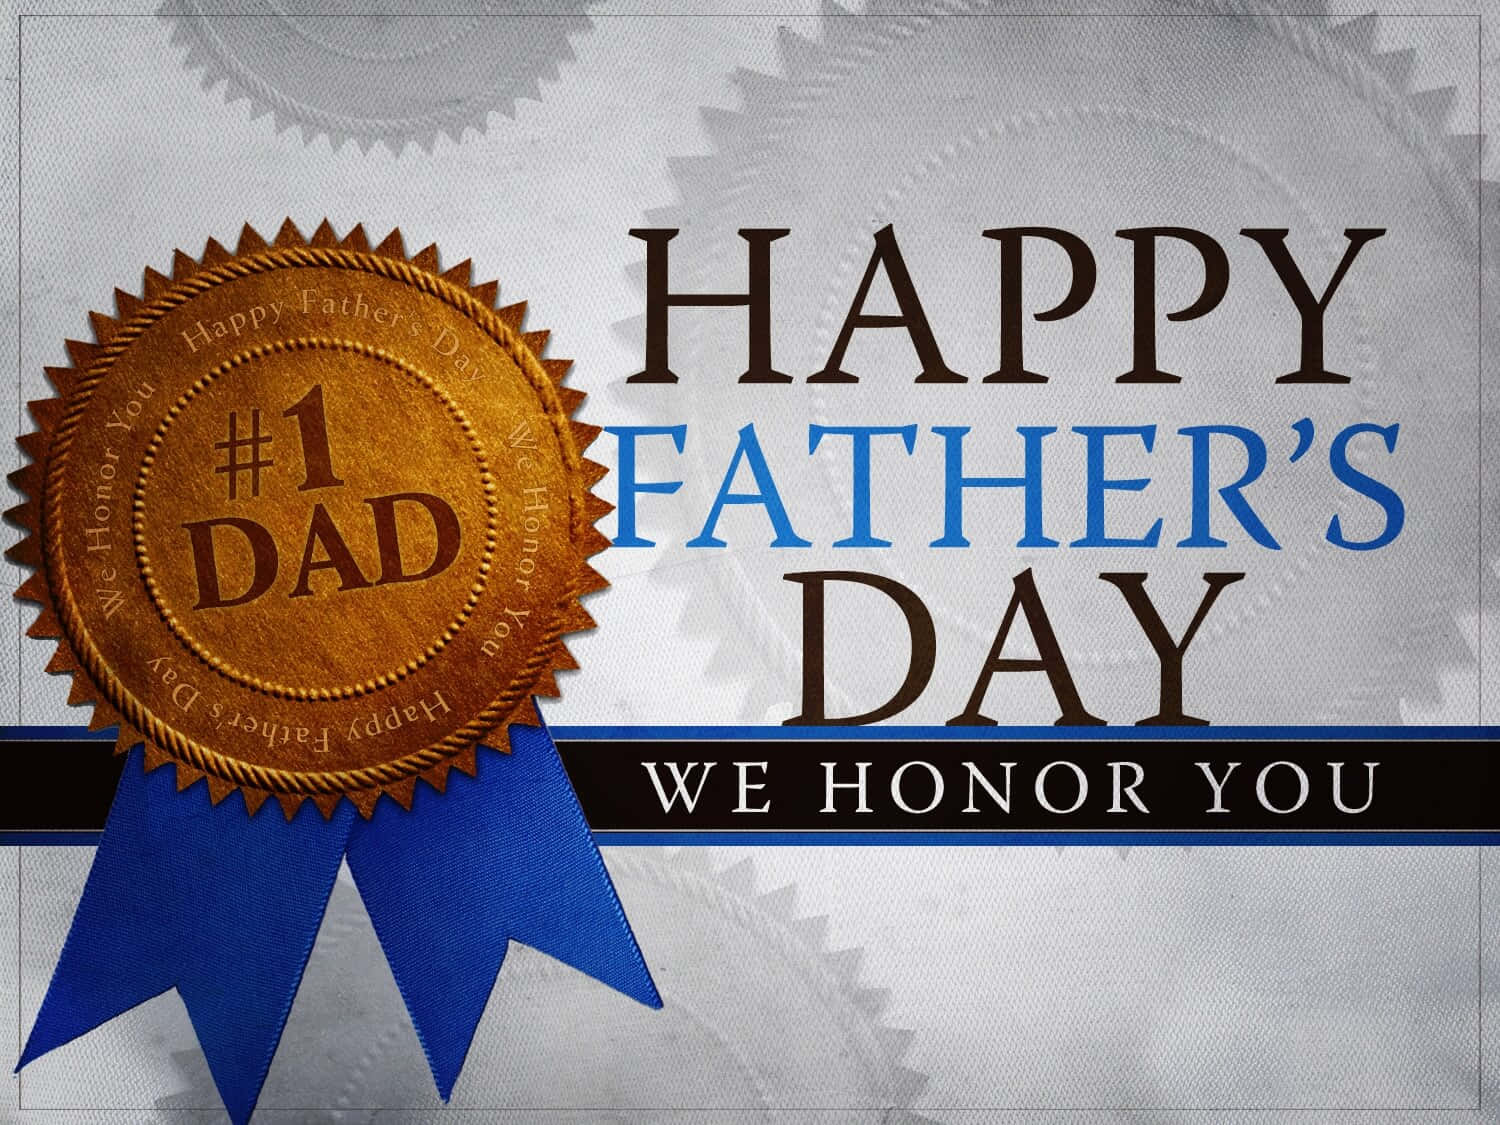 Celebrate Father's Day with a Special Gift